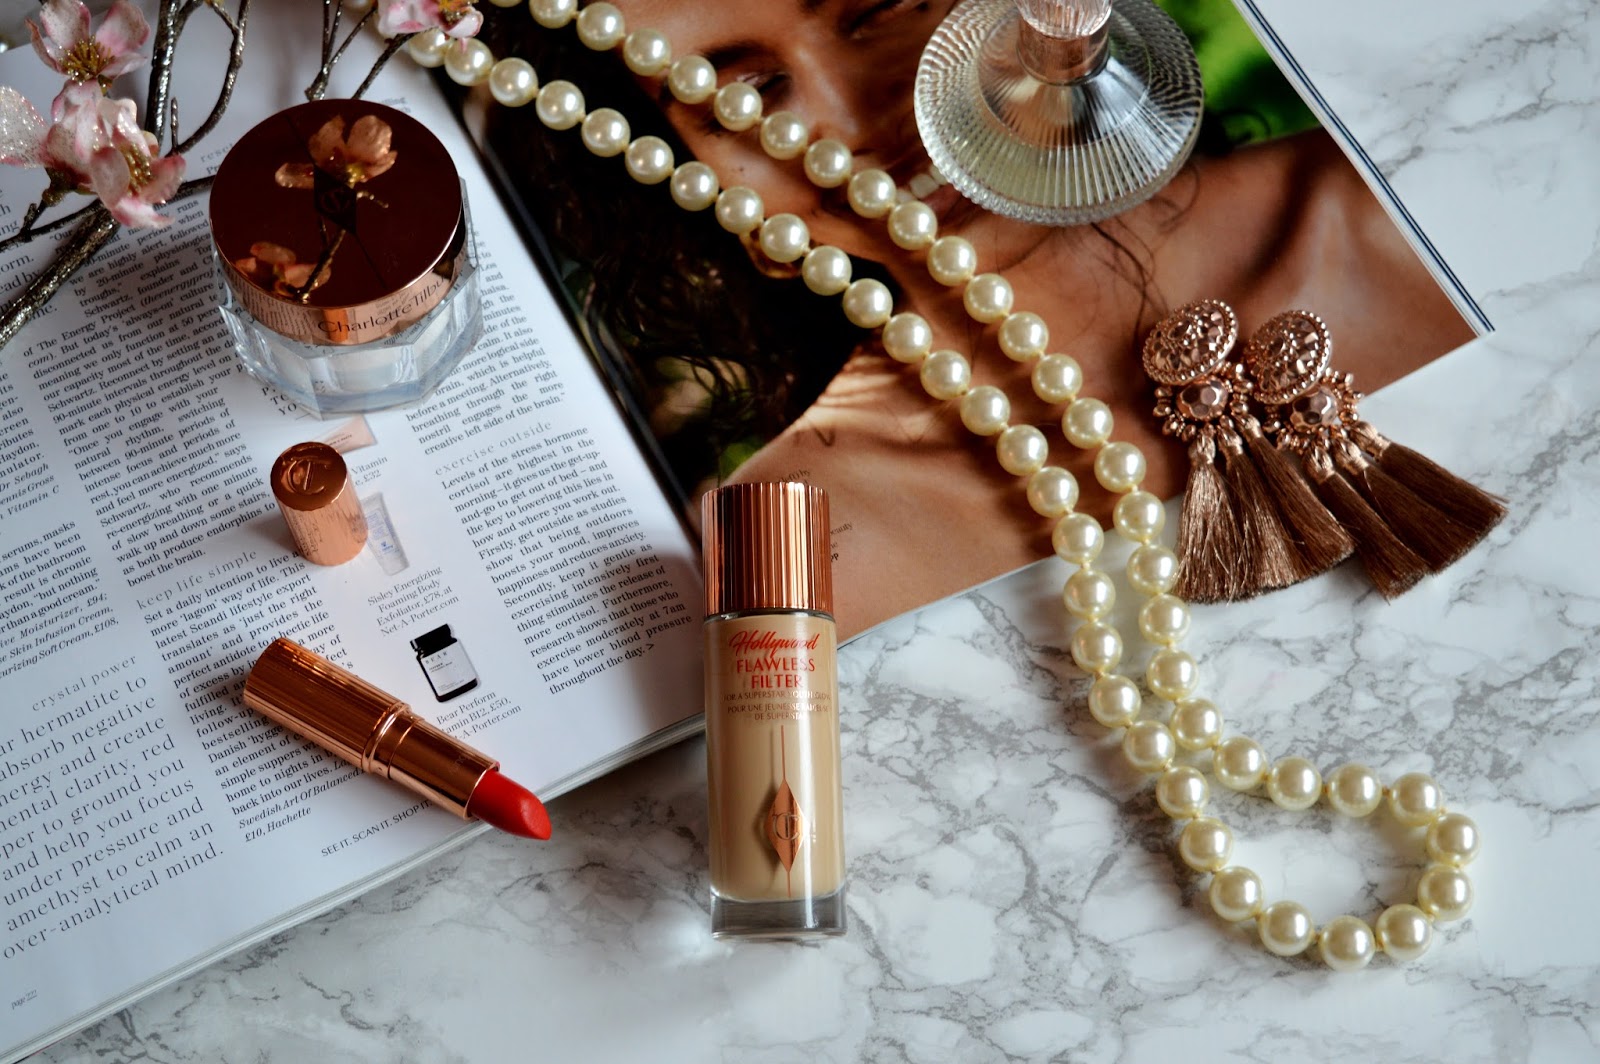 Charlotte Tilbury Hollywood Flawless Filter review